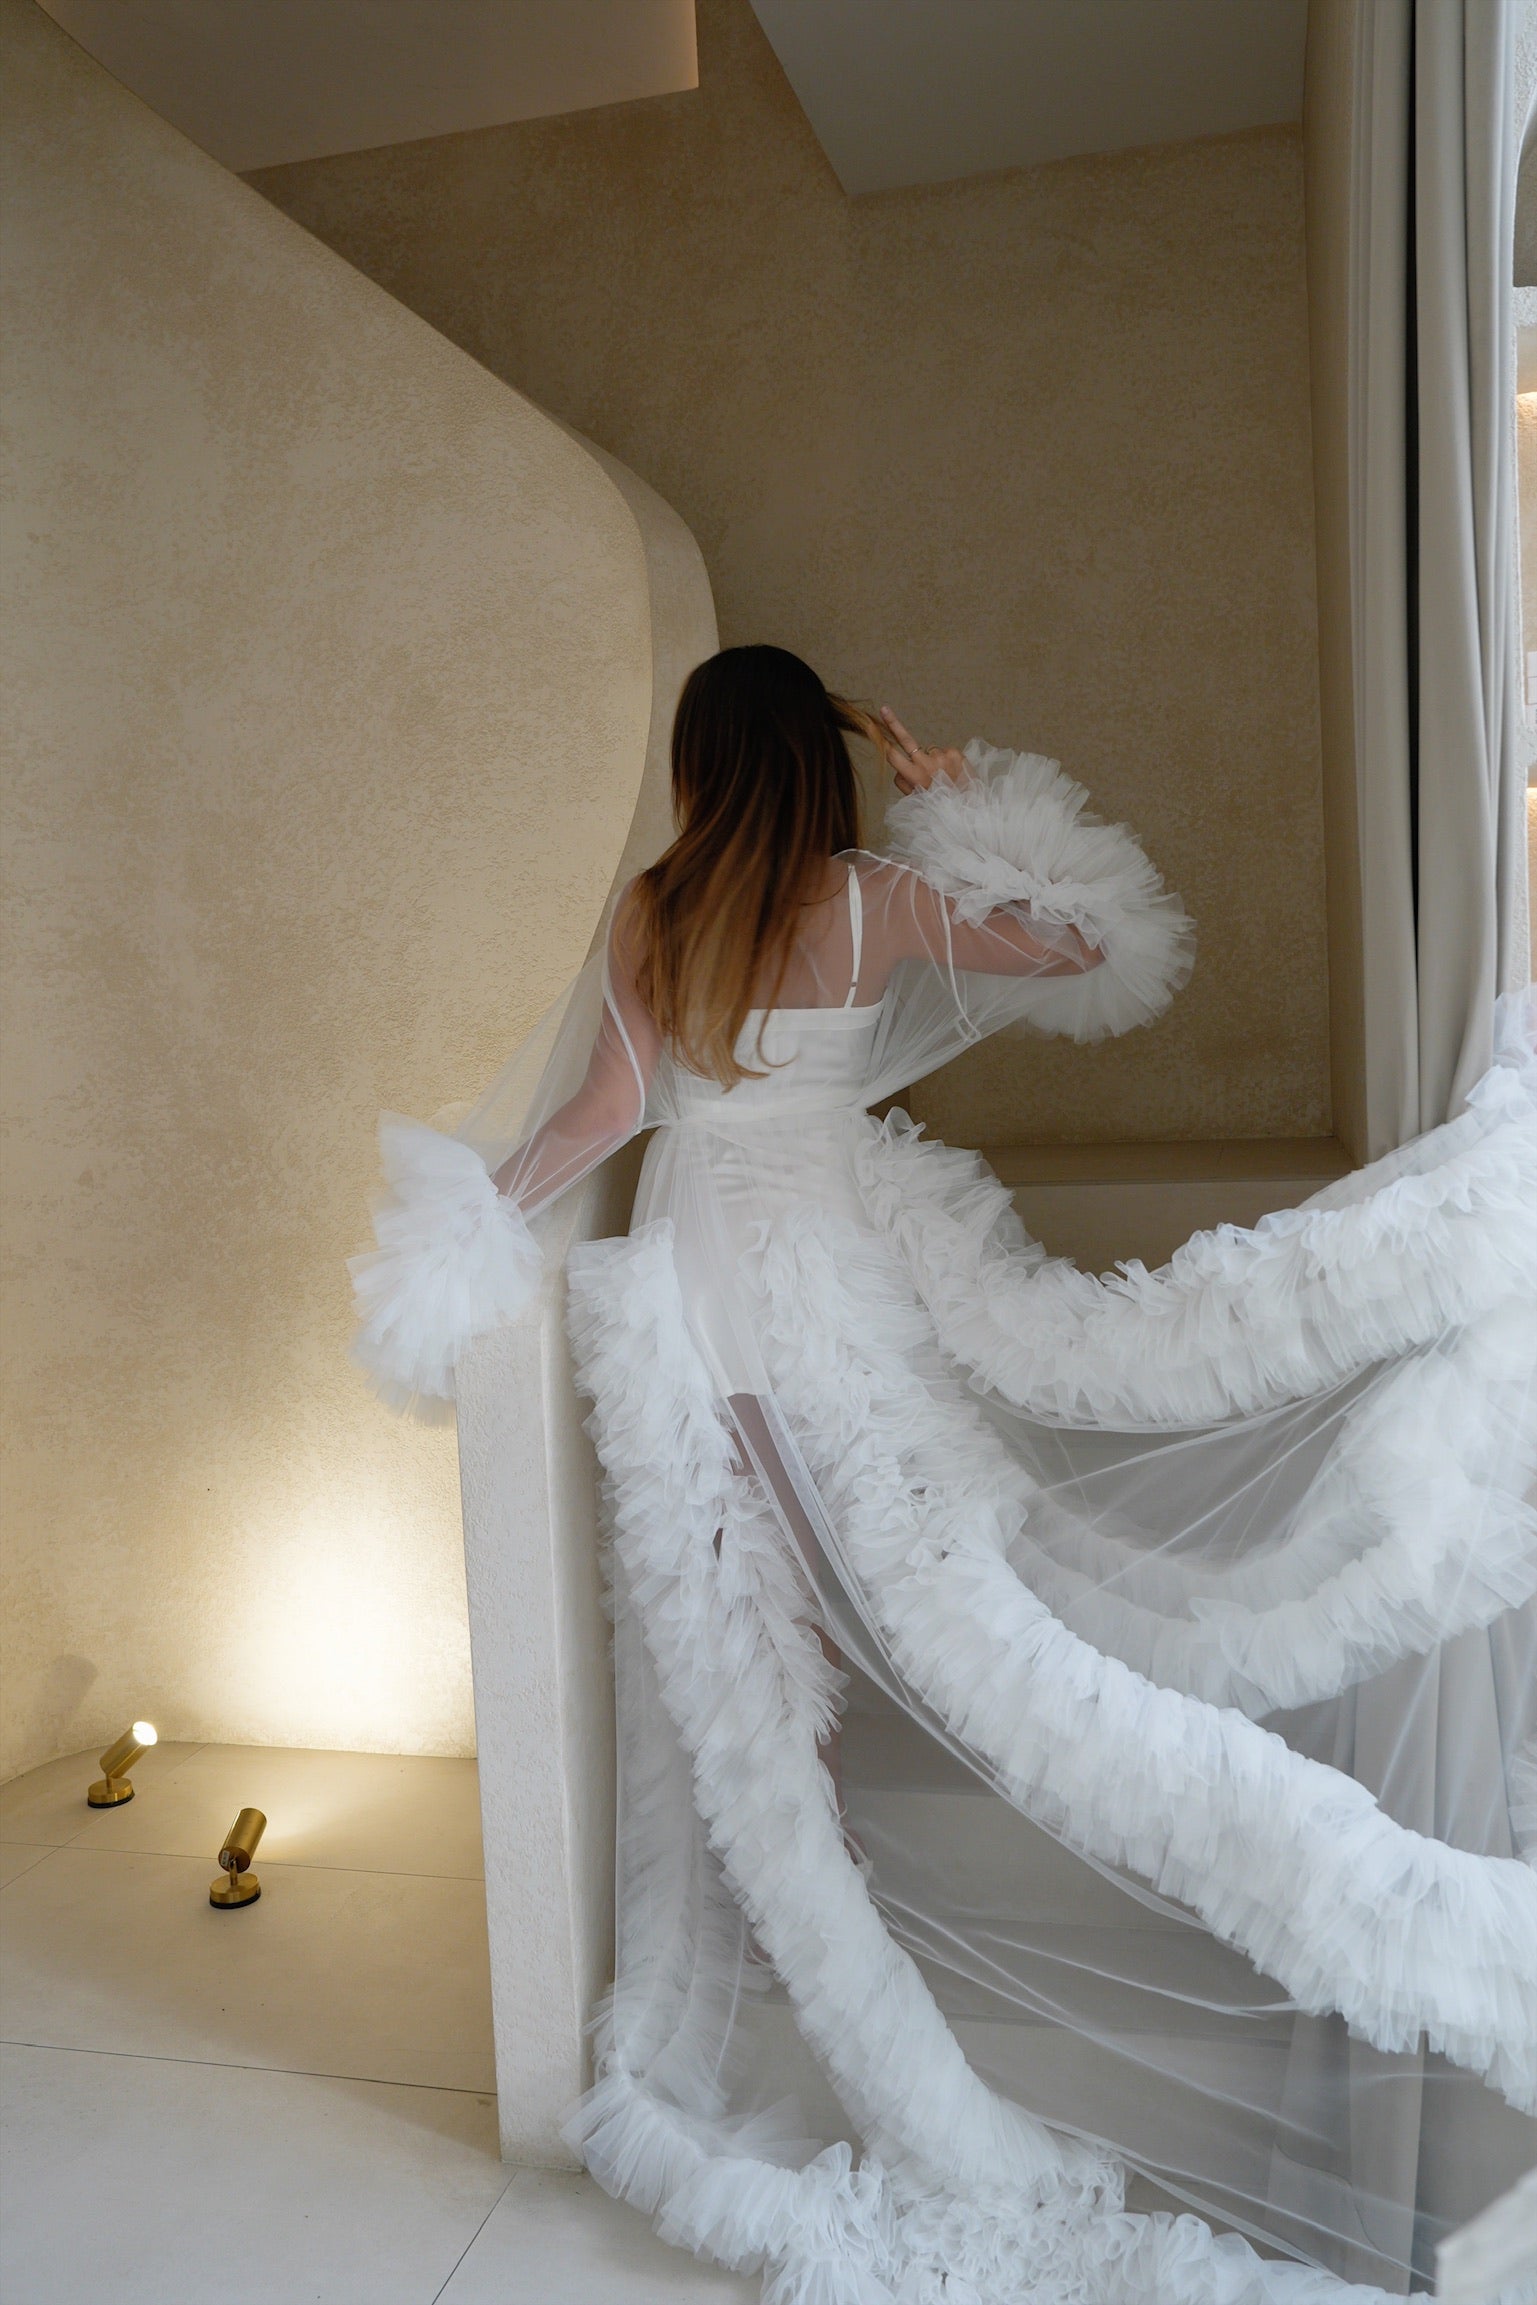 Bride wearing Elenora bridal ruffles robe posing for a photo on a staircase